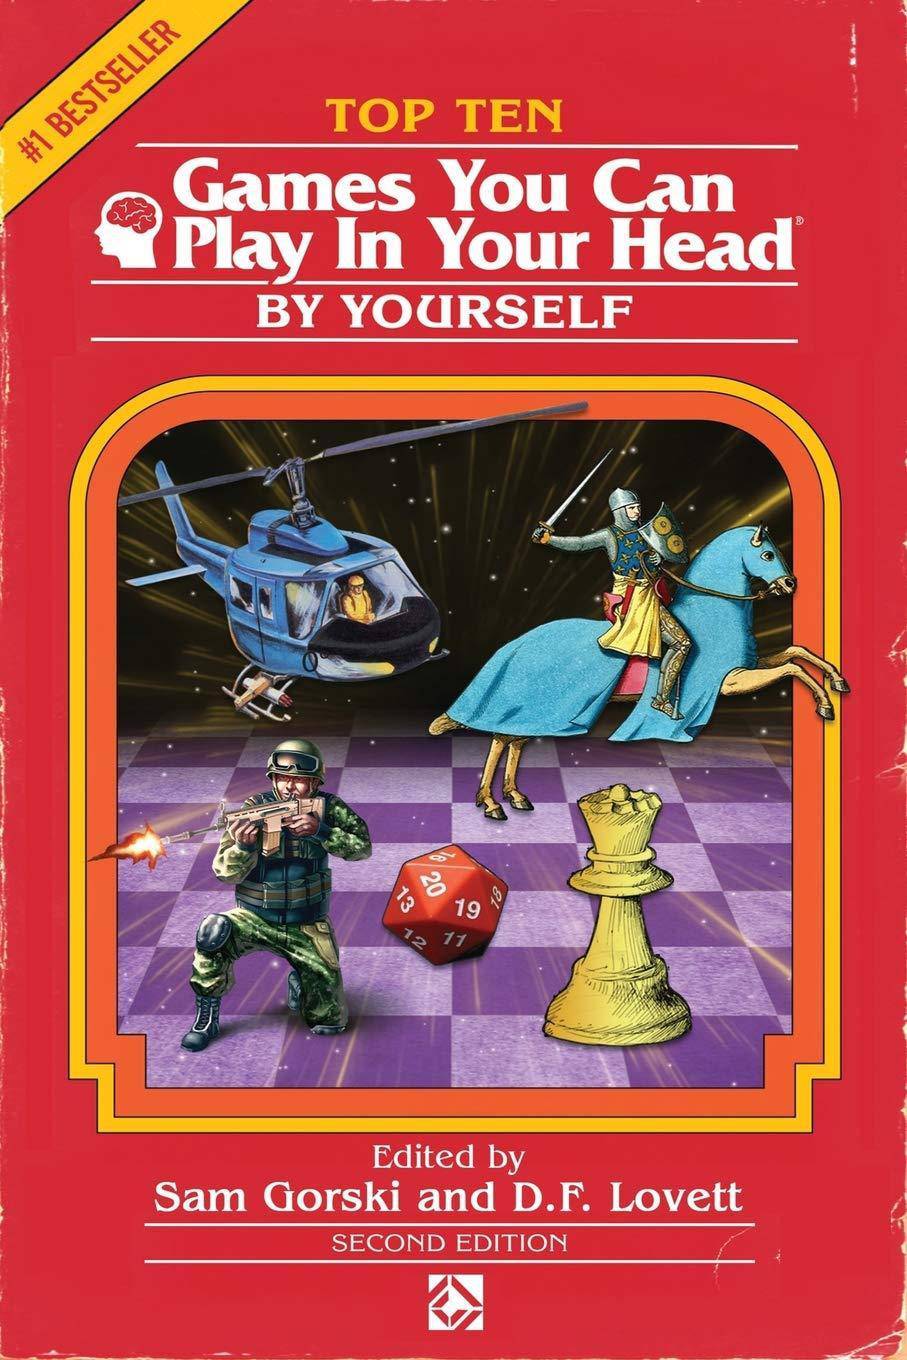 Top 10 Games You Can Play In Your Head, By Yourself - SureShot Books Publishing LLC